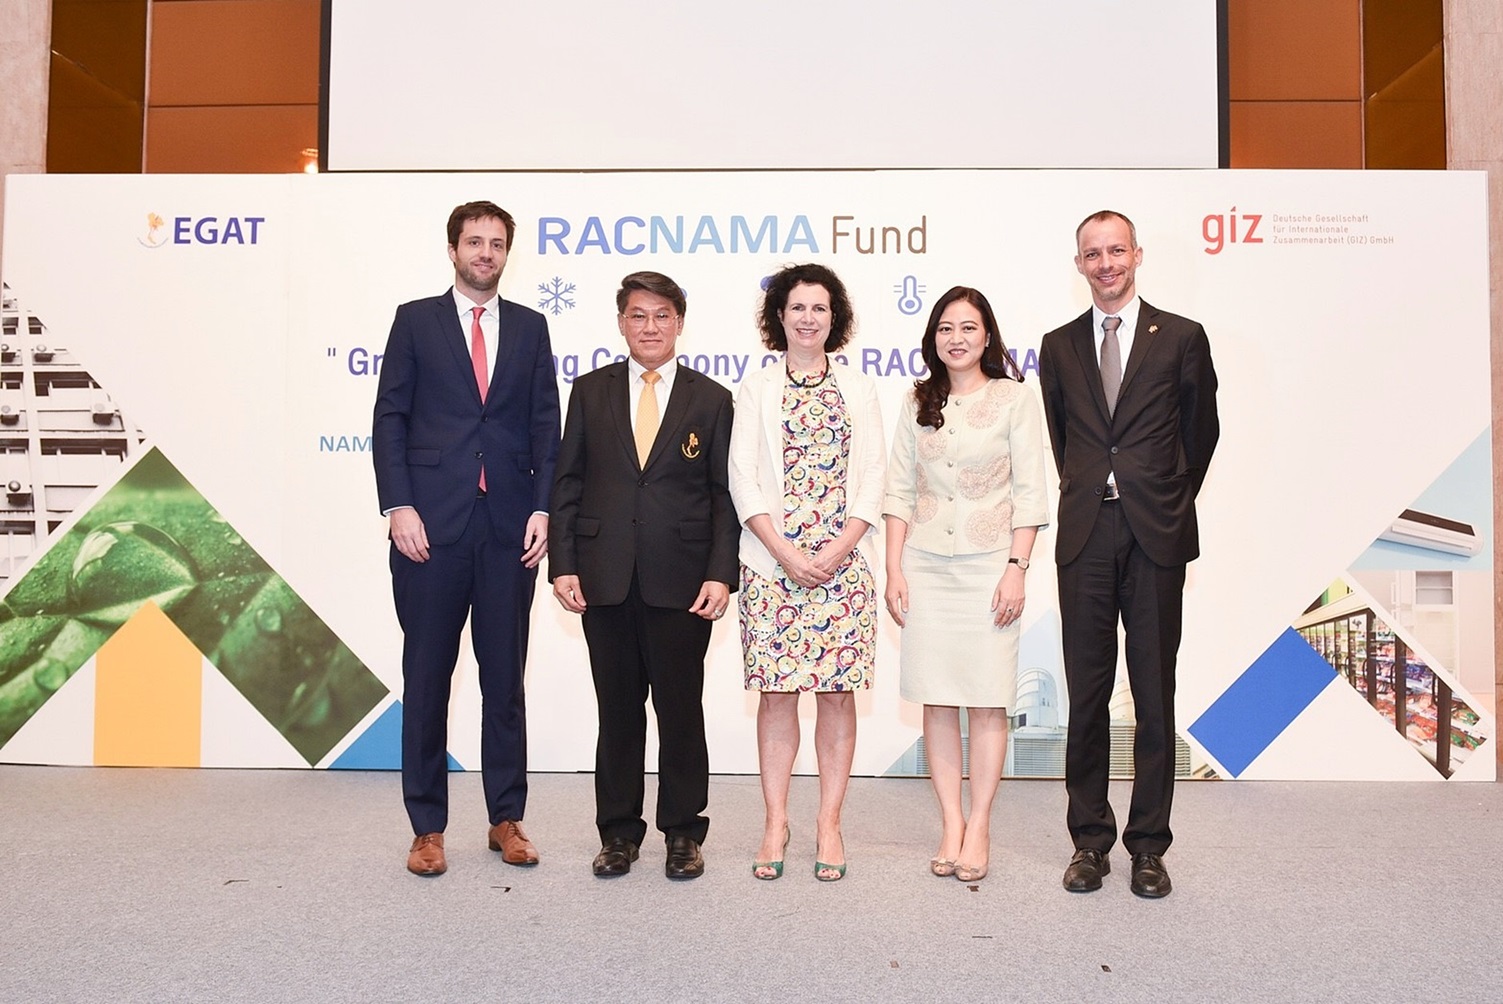 EGAT pioneers Thailand’s 320-Million THB RAC NAMA Fund In support of green industry and climate-friendly & energy-efficient cooling products